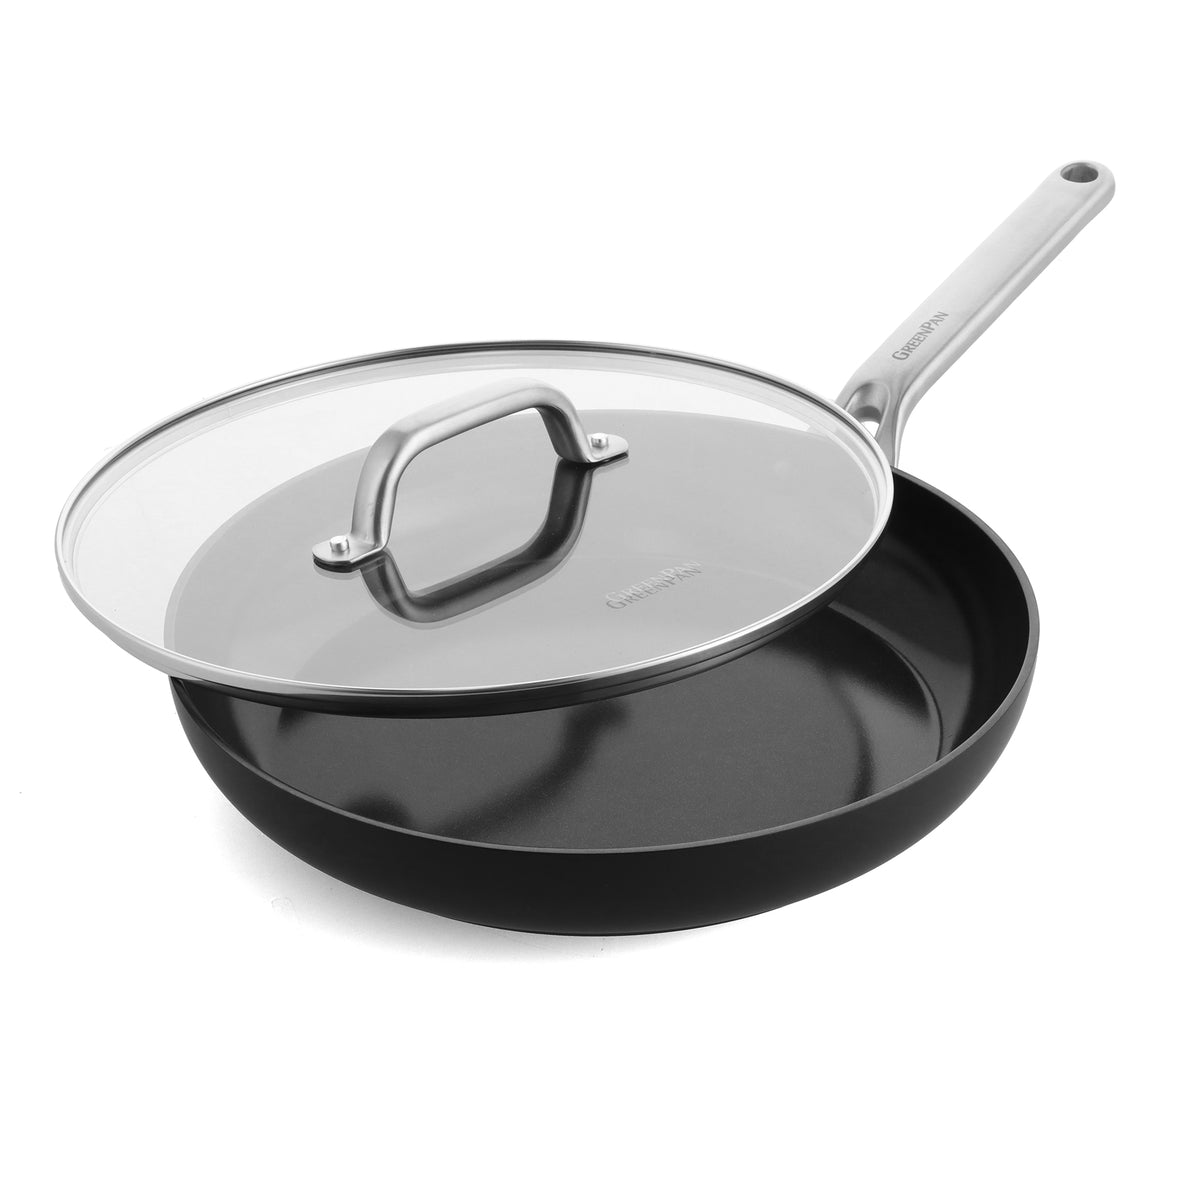 Omega Ceramic Nonstick 12" Frypan with Lid